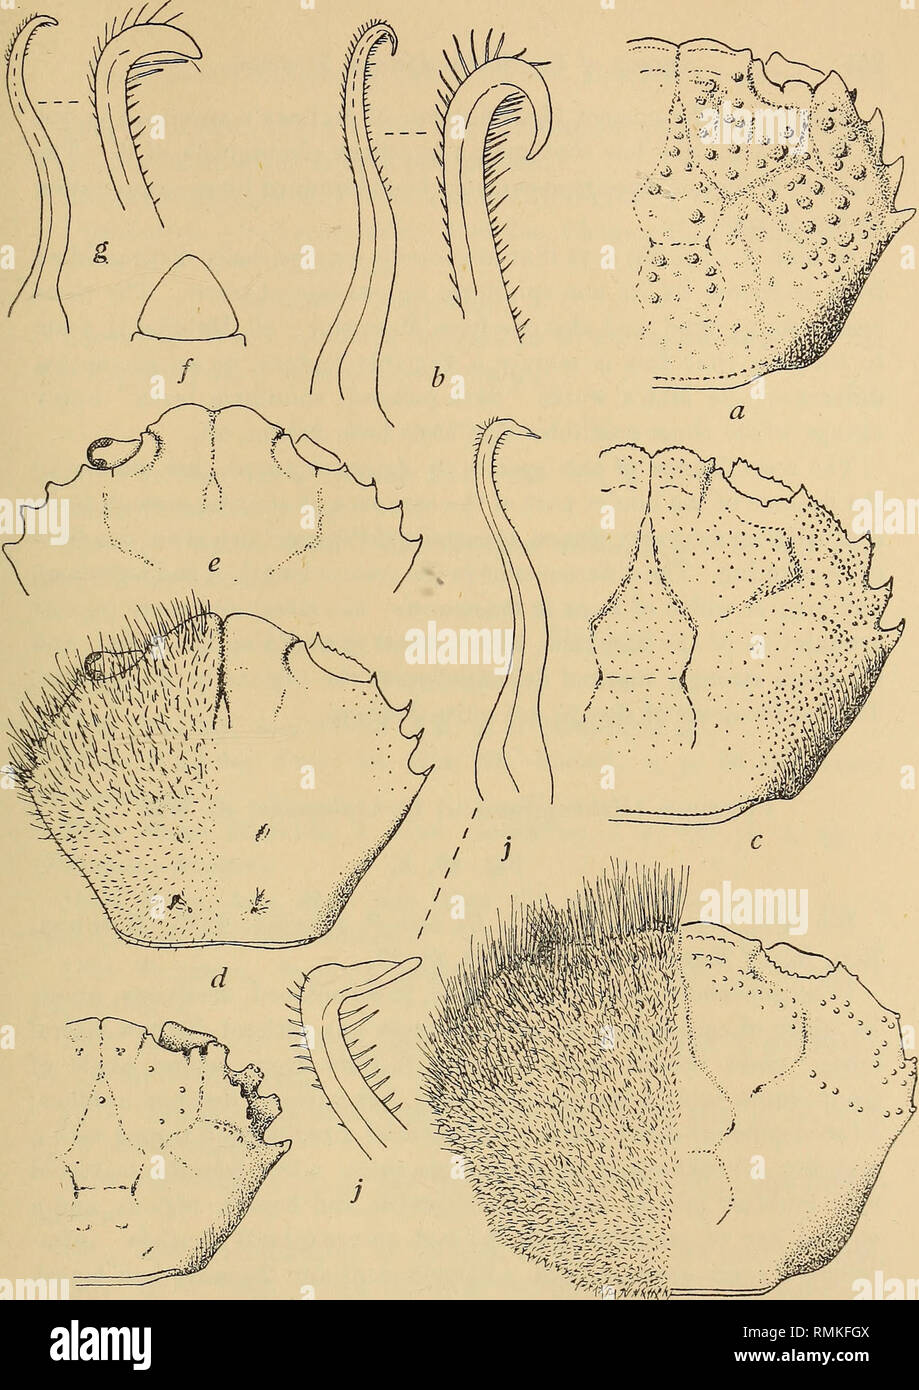 . Annals of the South African Museum = Annale van die Suid-Afrikaanse Museum. Natural history. Fig. 49.—Pilumnus vespertilio Fabr. a, carapace, denuded, b, 1st pleopod &lt;$, with apex further enlarged. Pilumnus longicornis Hilg. c, carapace, denuded (front declivous, but drawn as if fully visible in dorsal view). Pilumnus hirsutus Stmpsn. d, carapace, partly denuded, e, carapace of Hoetjes Bay specimens, showing variation in antero-lateral teeth. /, 7th abdominal segment &lt;J. g, 1st pleopod q, with apex further enlarged. Pilumnus trichophoroides de Man. h, carapace, partly denuded (front de Stock Photo